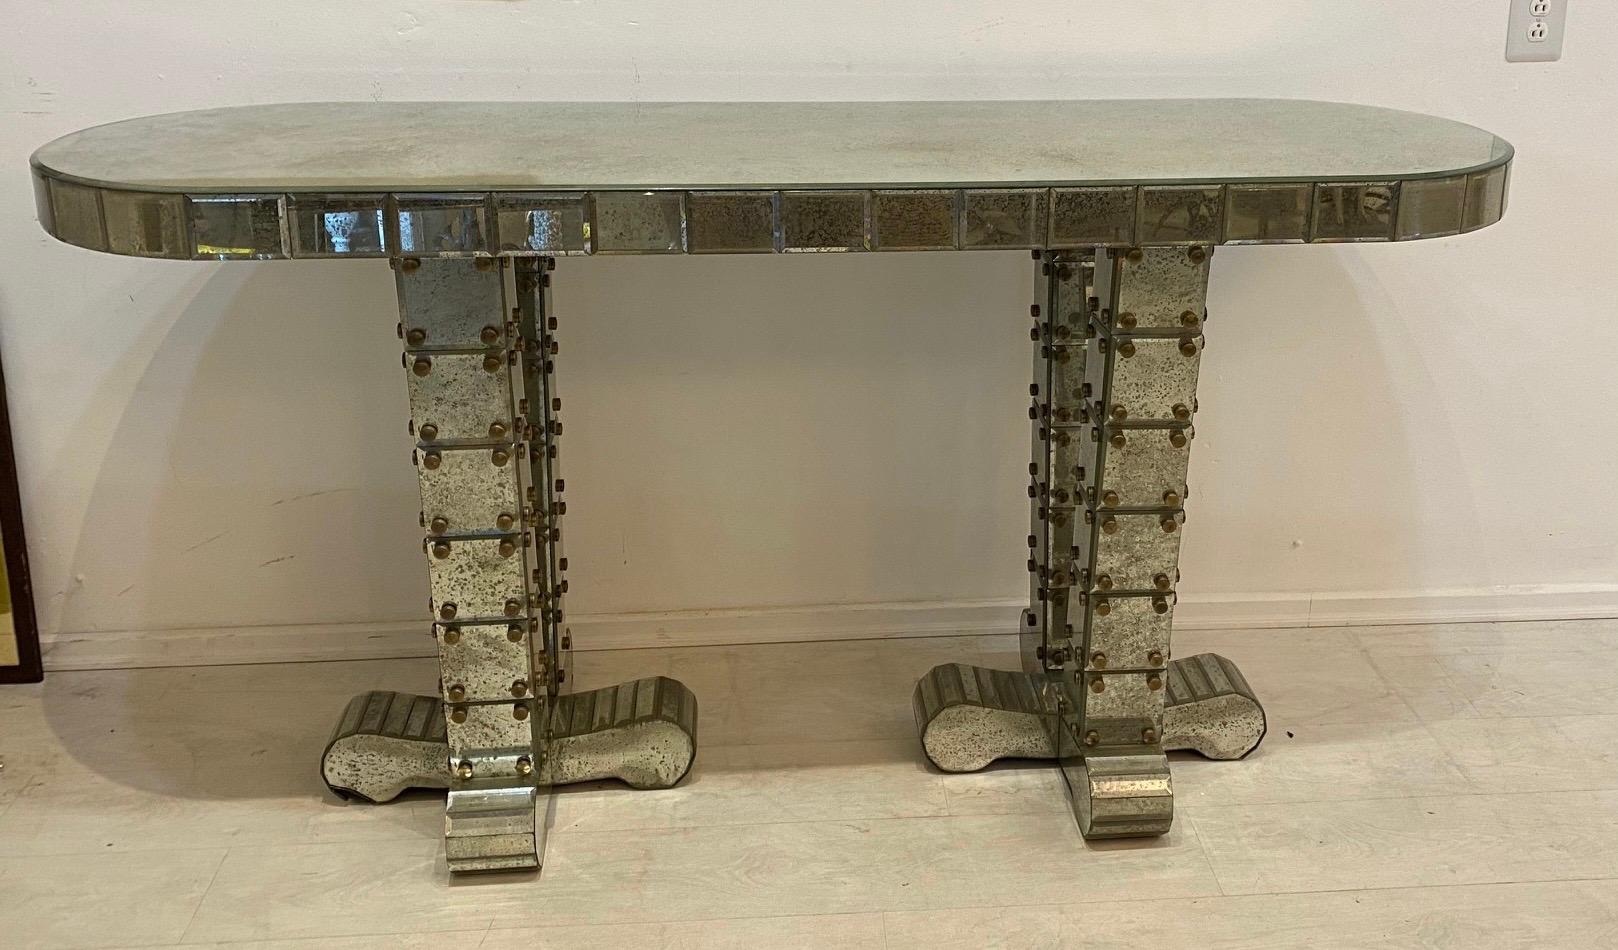 A pair of highest quality mirrored consoles with beveled mirrors and bronze elements… The design and execution of these consoles Are in the style of 1940s French designers.